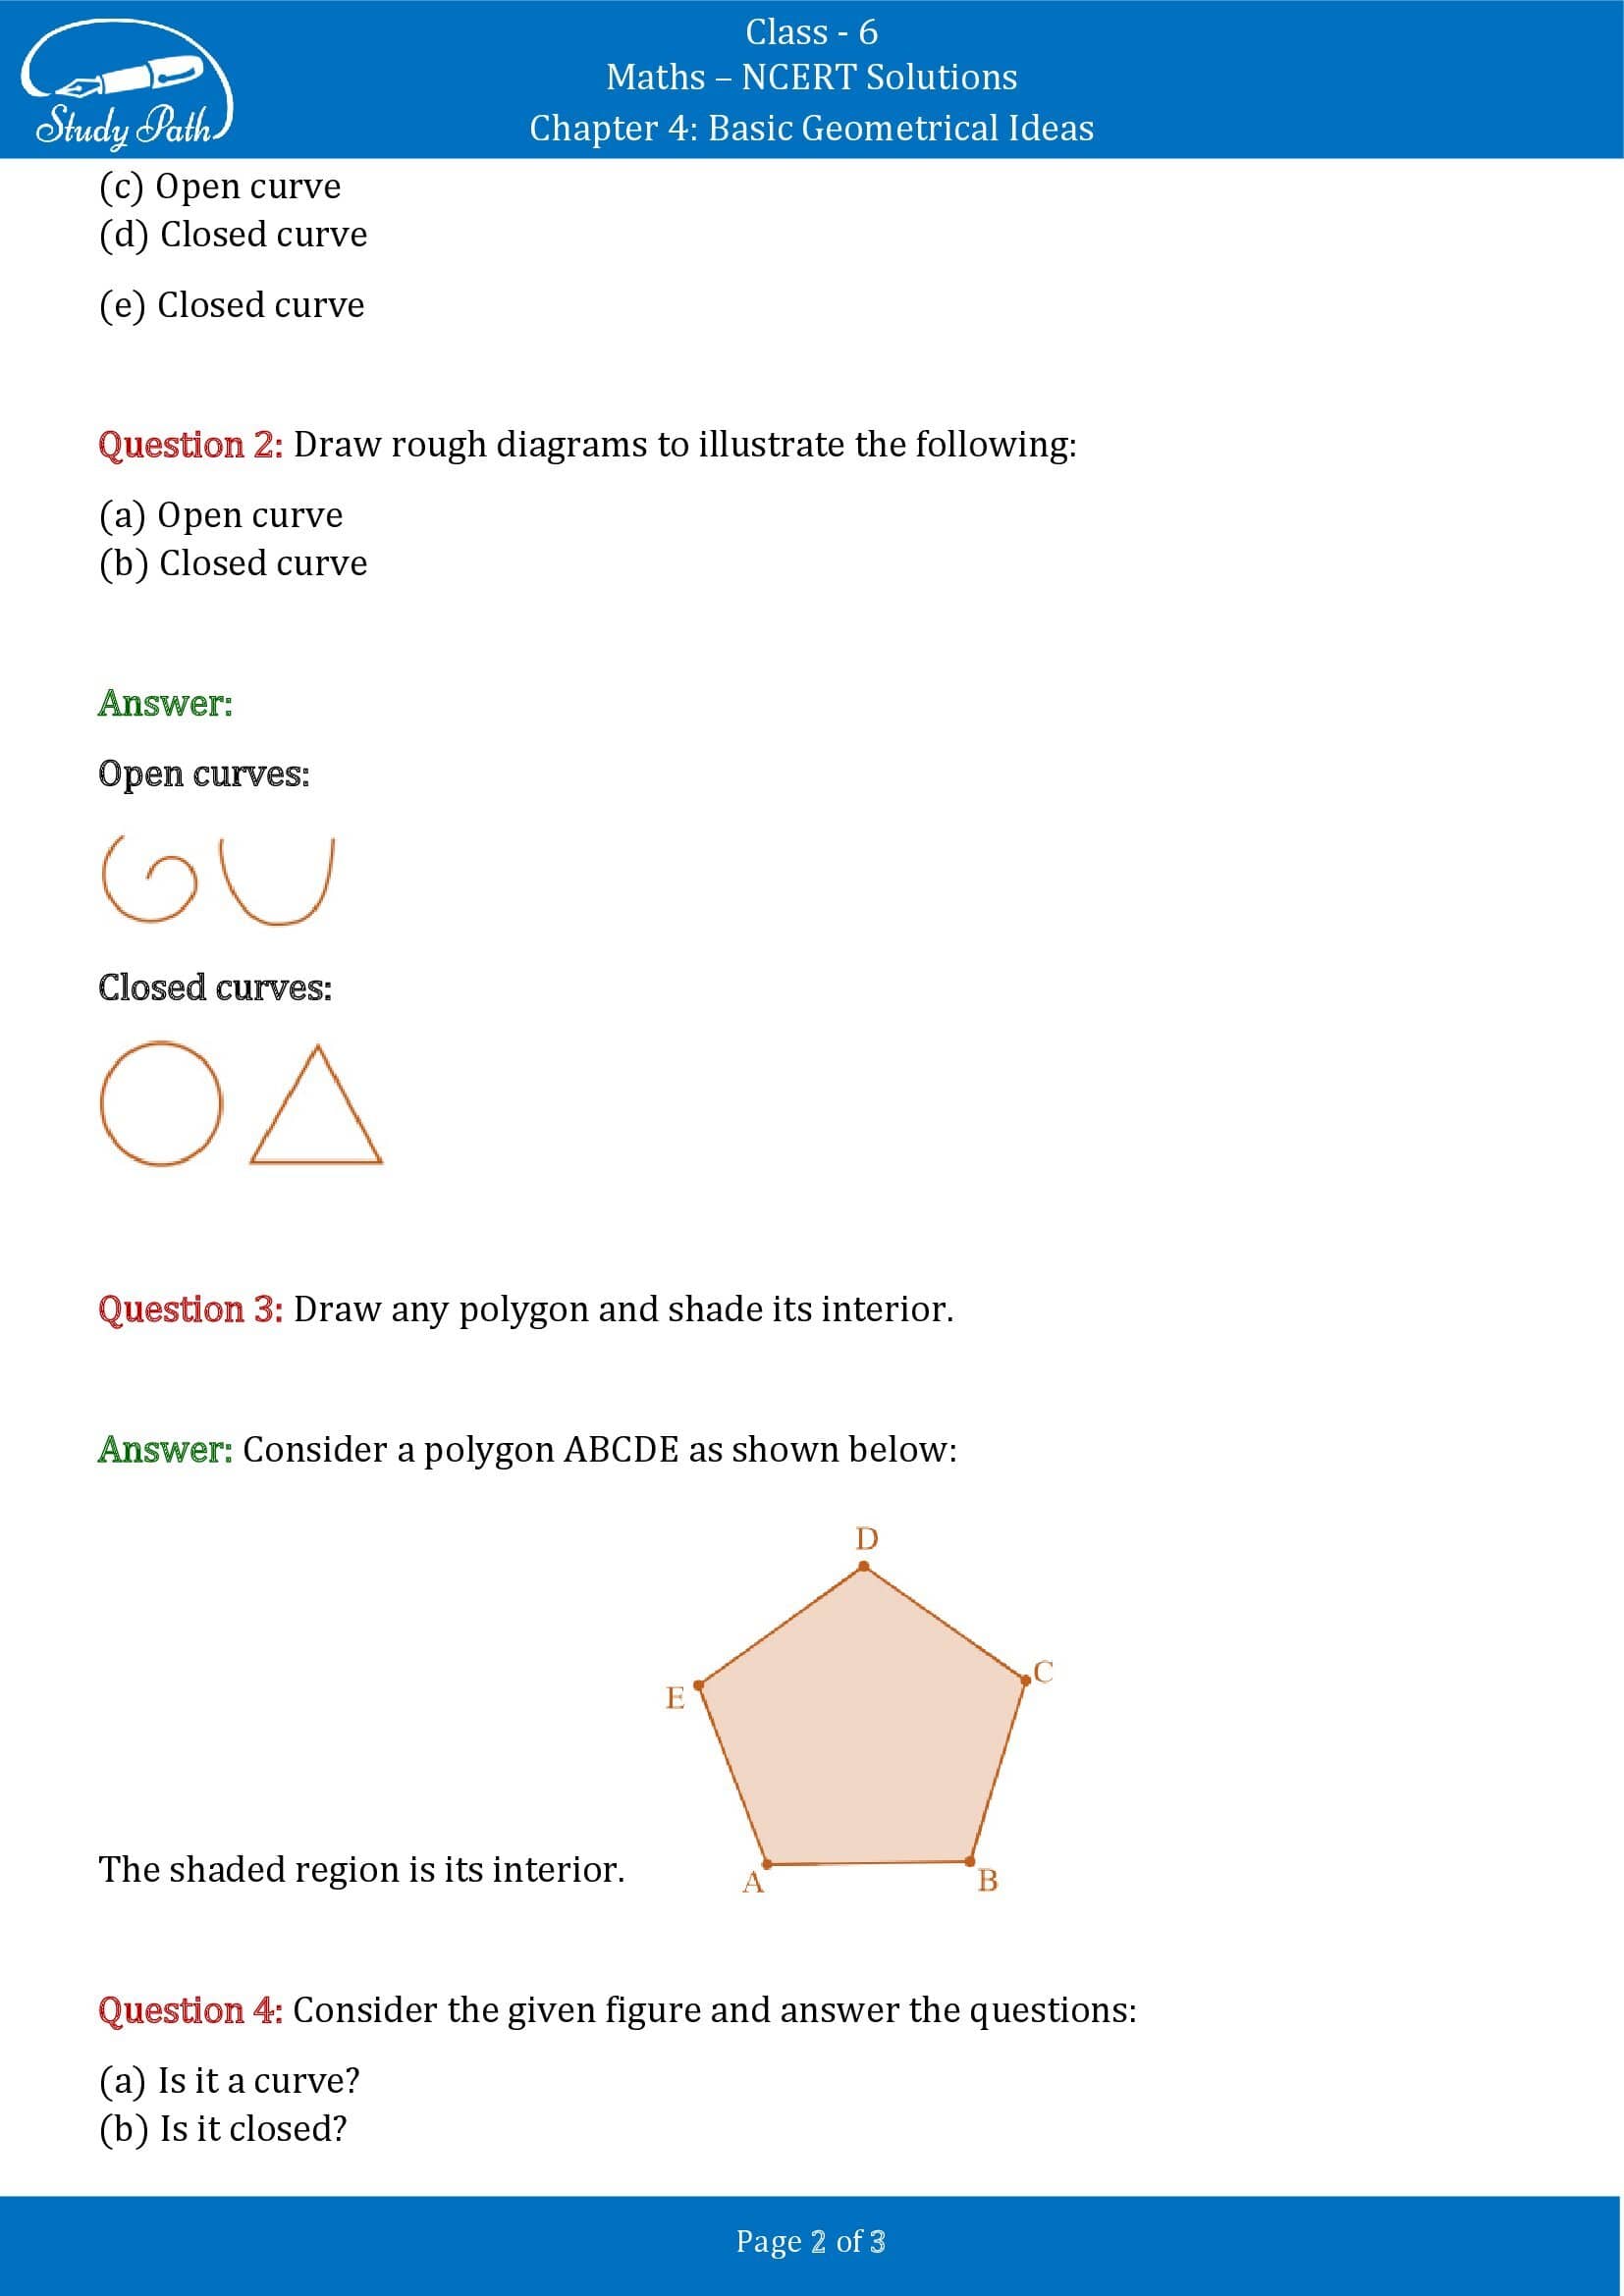 NCERT Solutions for Class 6 Maths Chapter 4 Basic Geometrical Ideas Exercise 4.2 00002